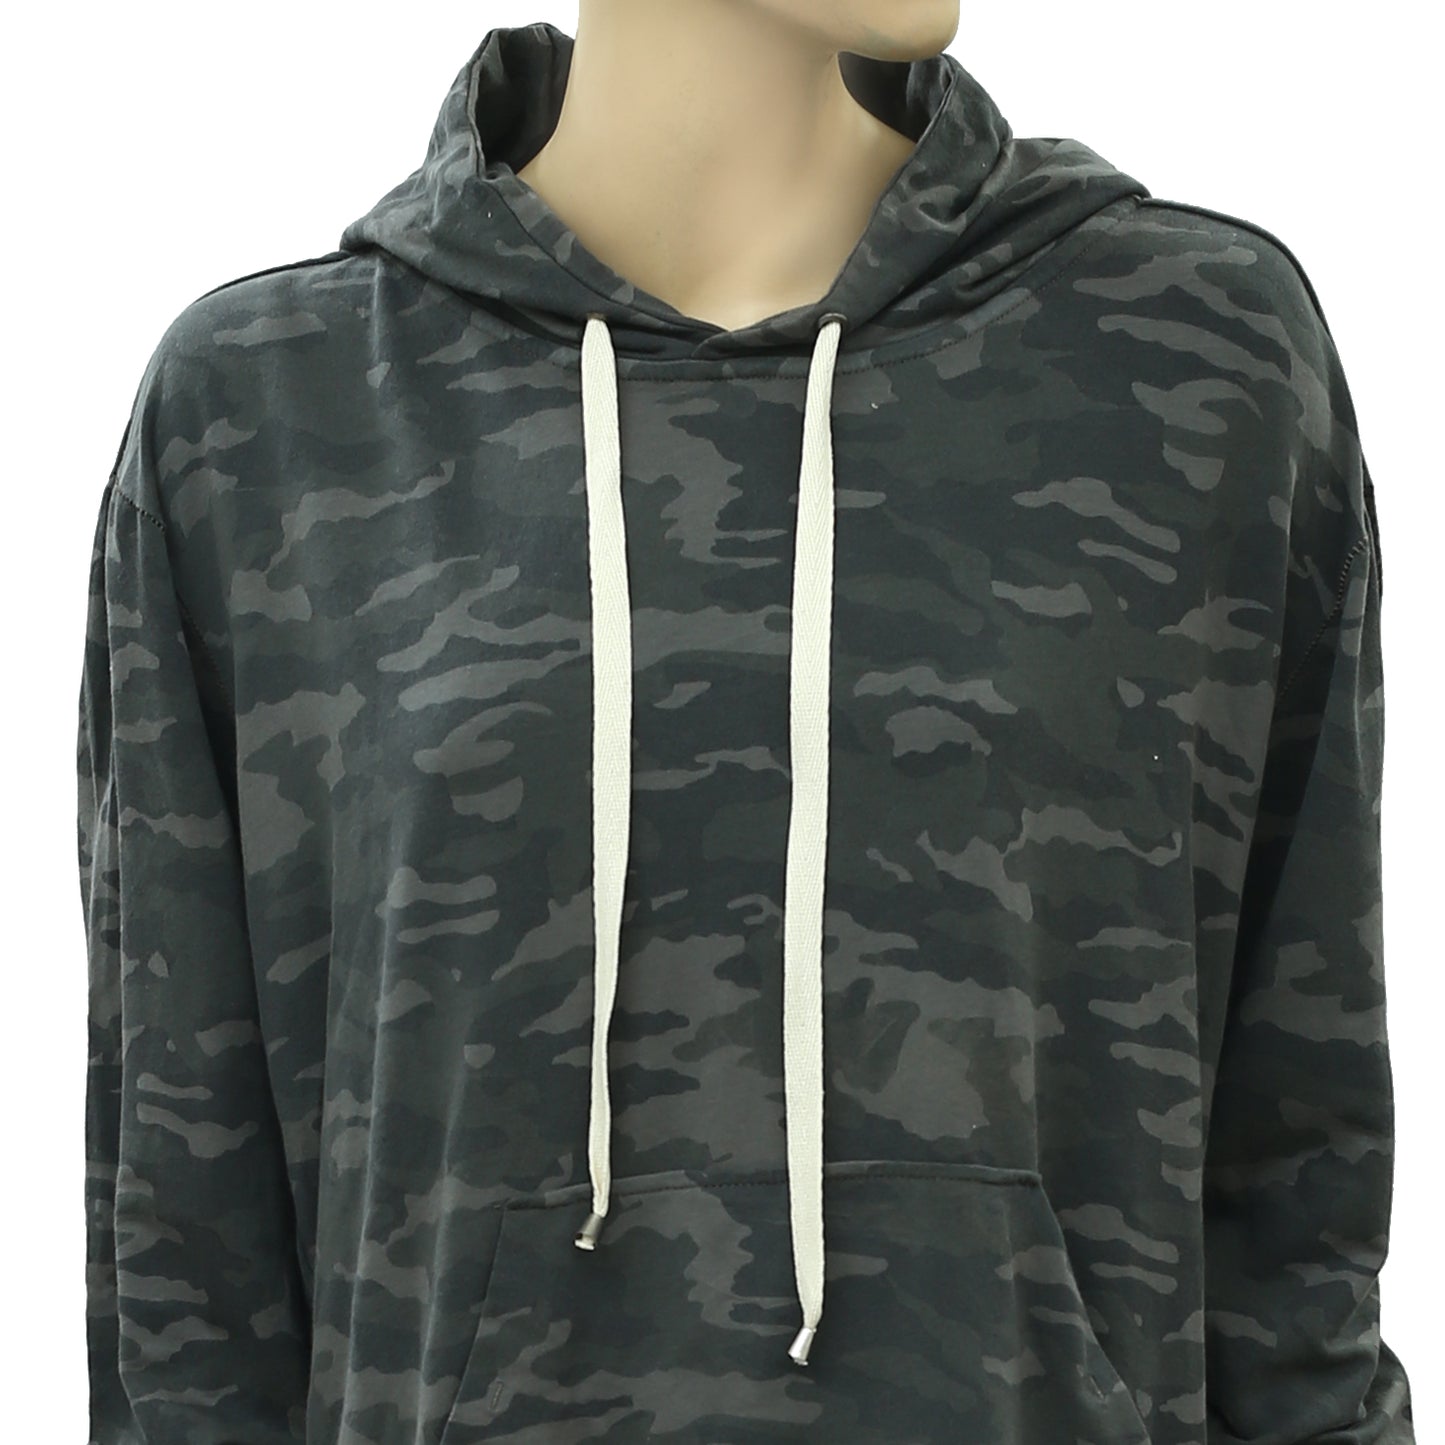 Urban Outfitters Military Printed Hoodie Top